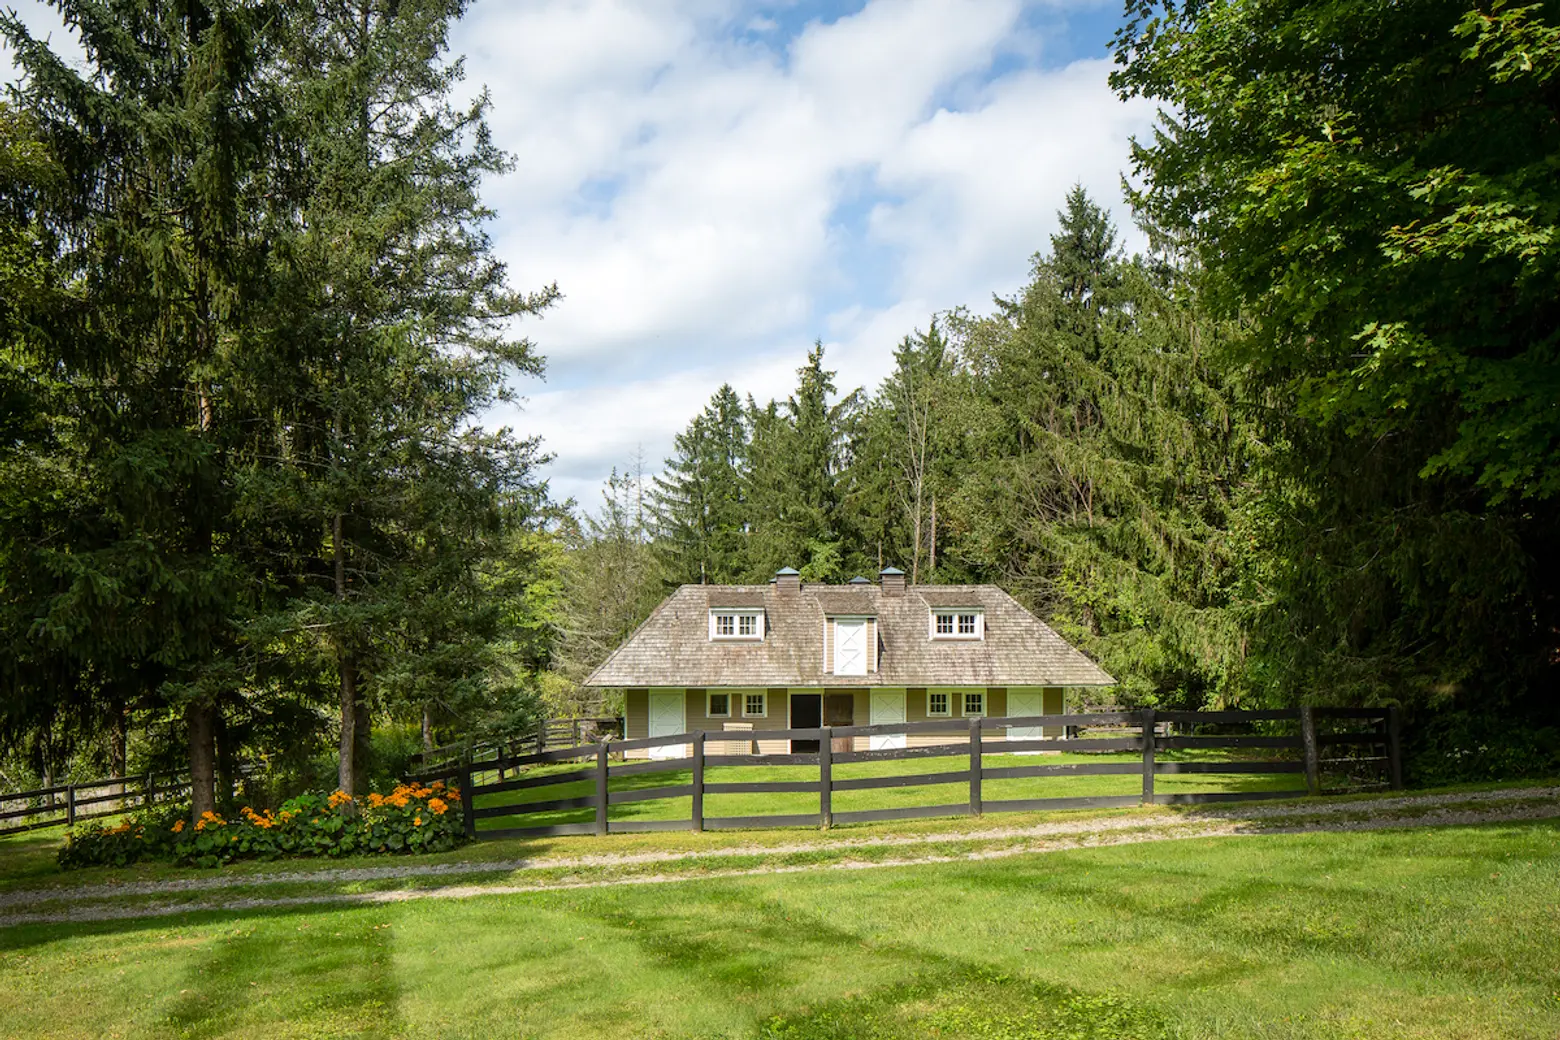 147 altamont road, cool listings, upstate, stables